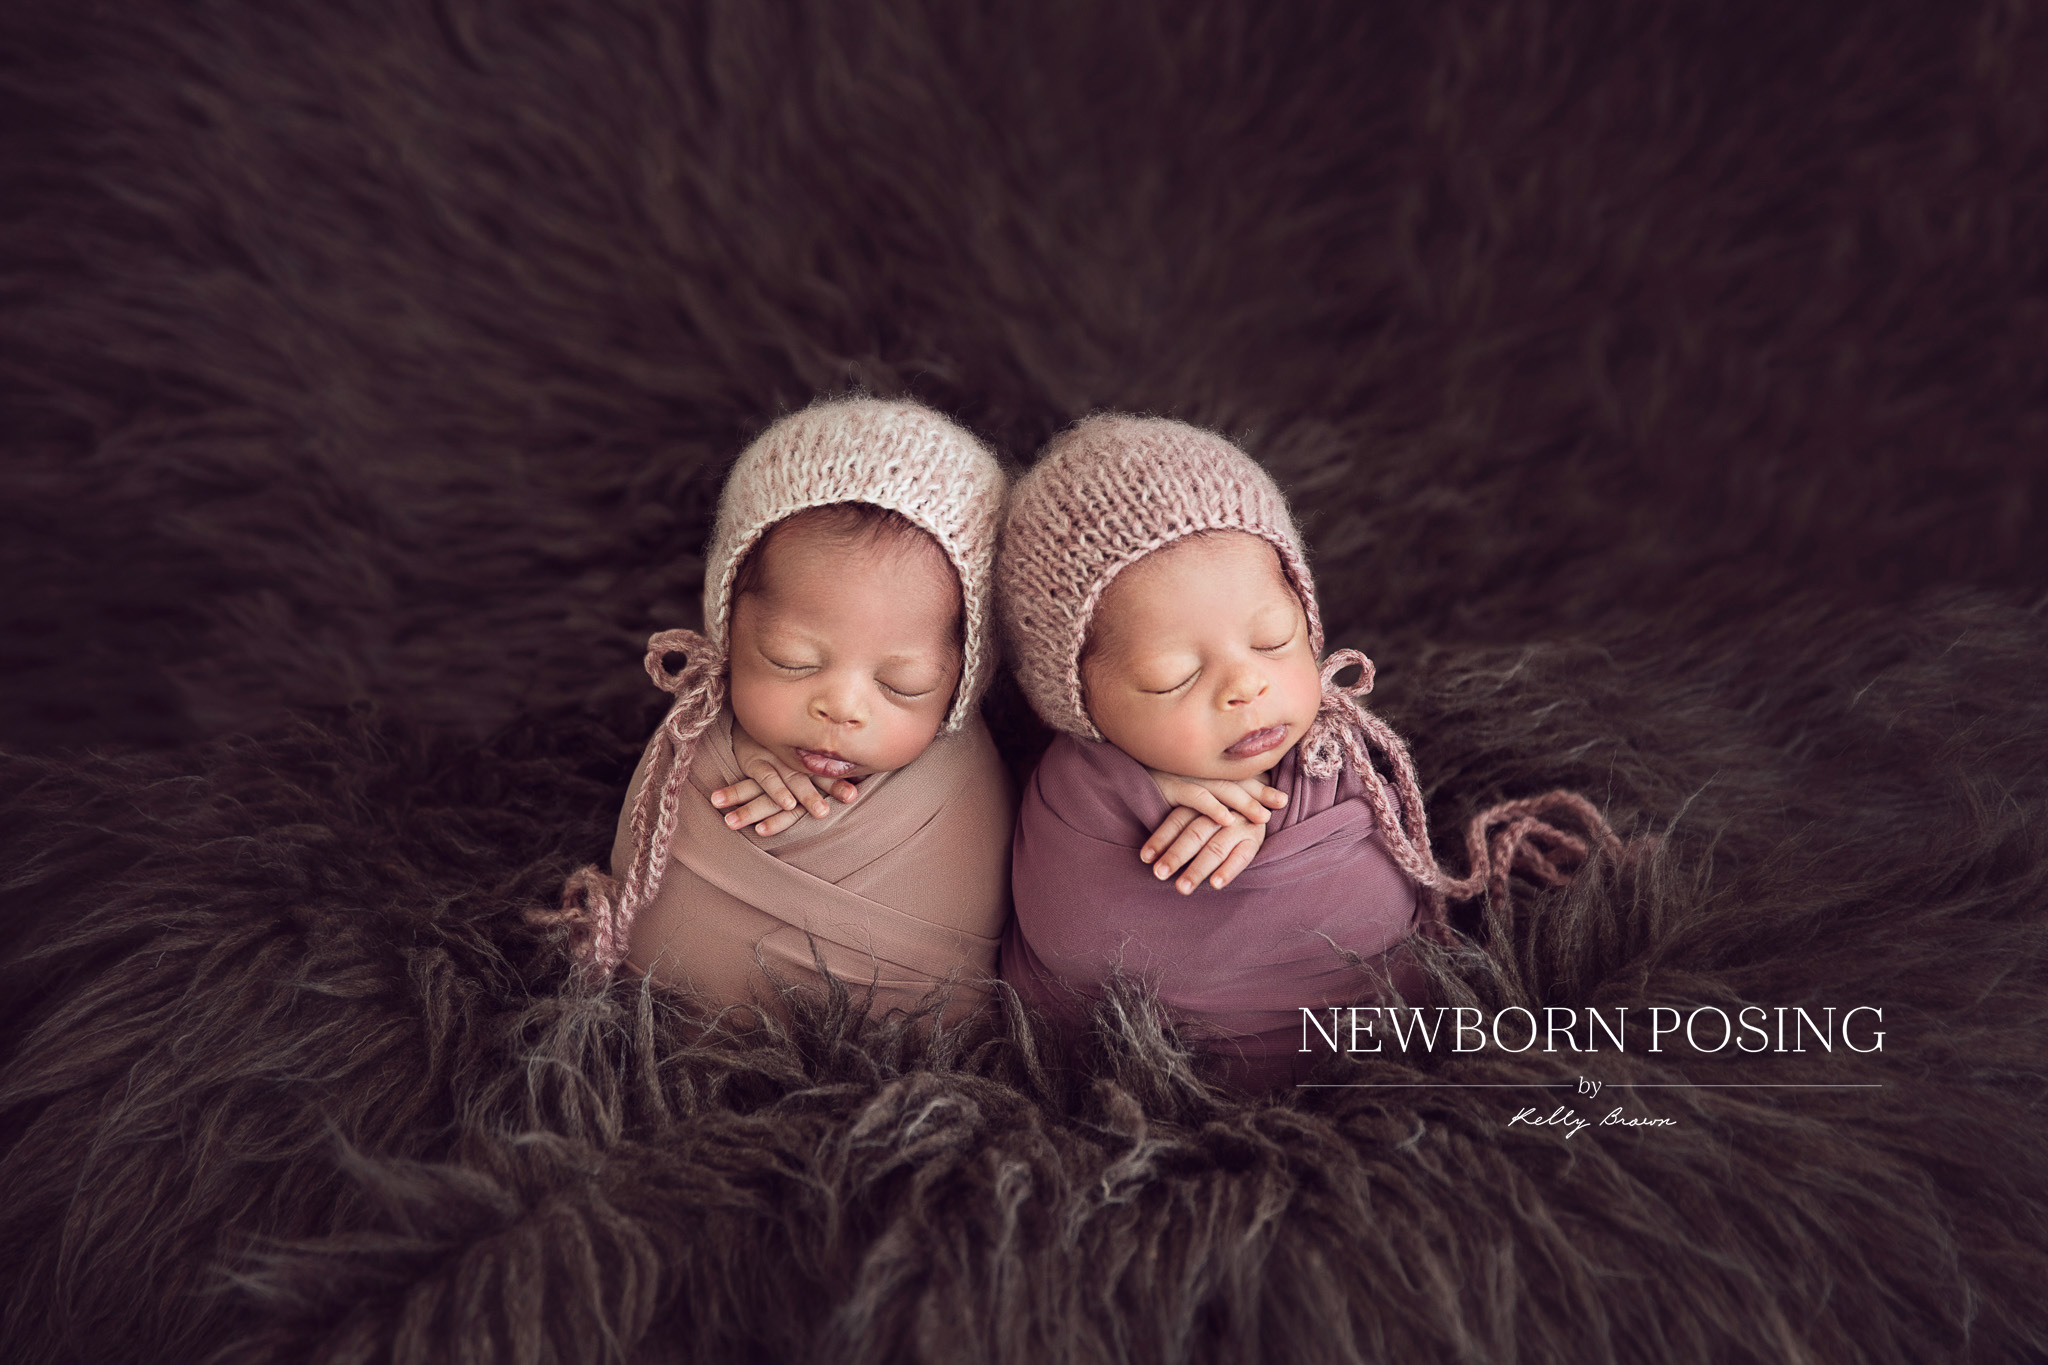 Newborn Posing with Kelly Brown | CreativeLive | Newborn photography poses, Newborn  photography tips, Newborn photography